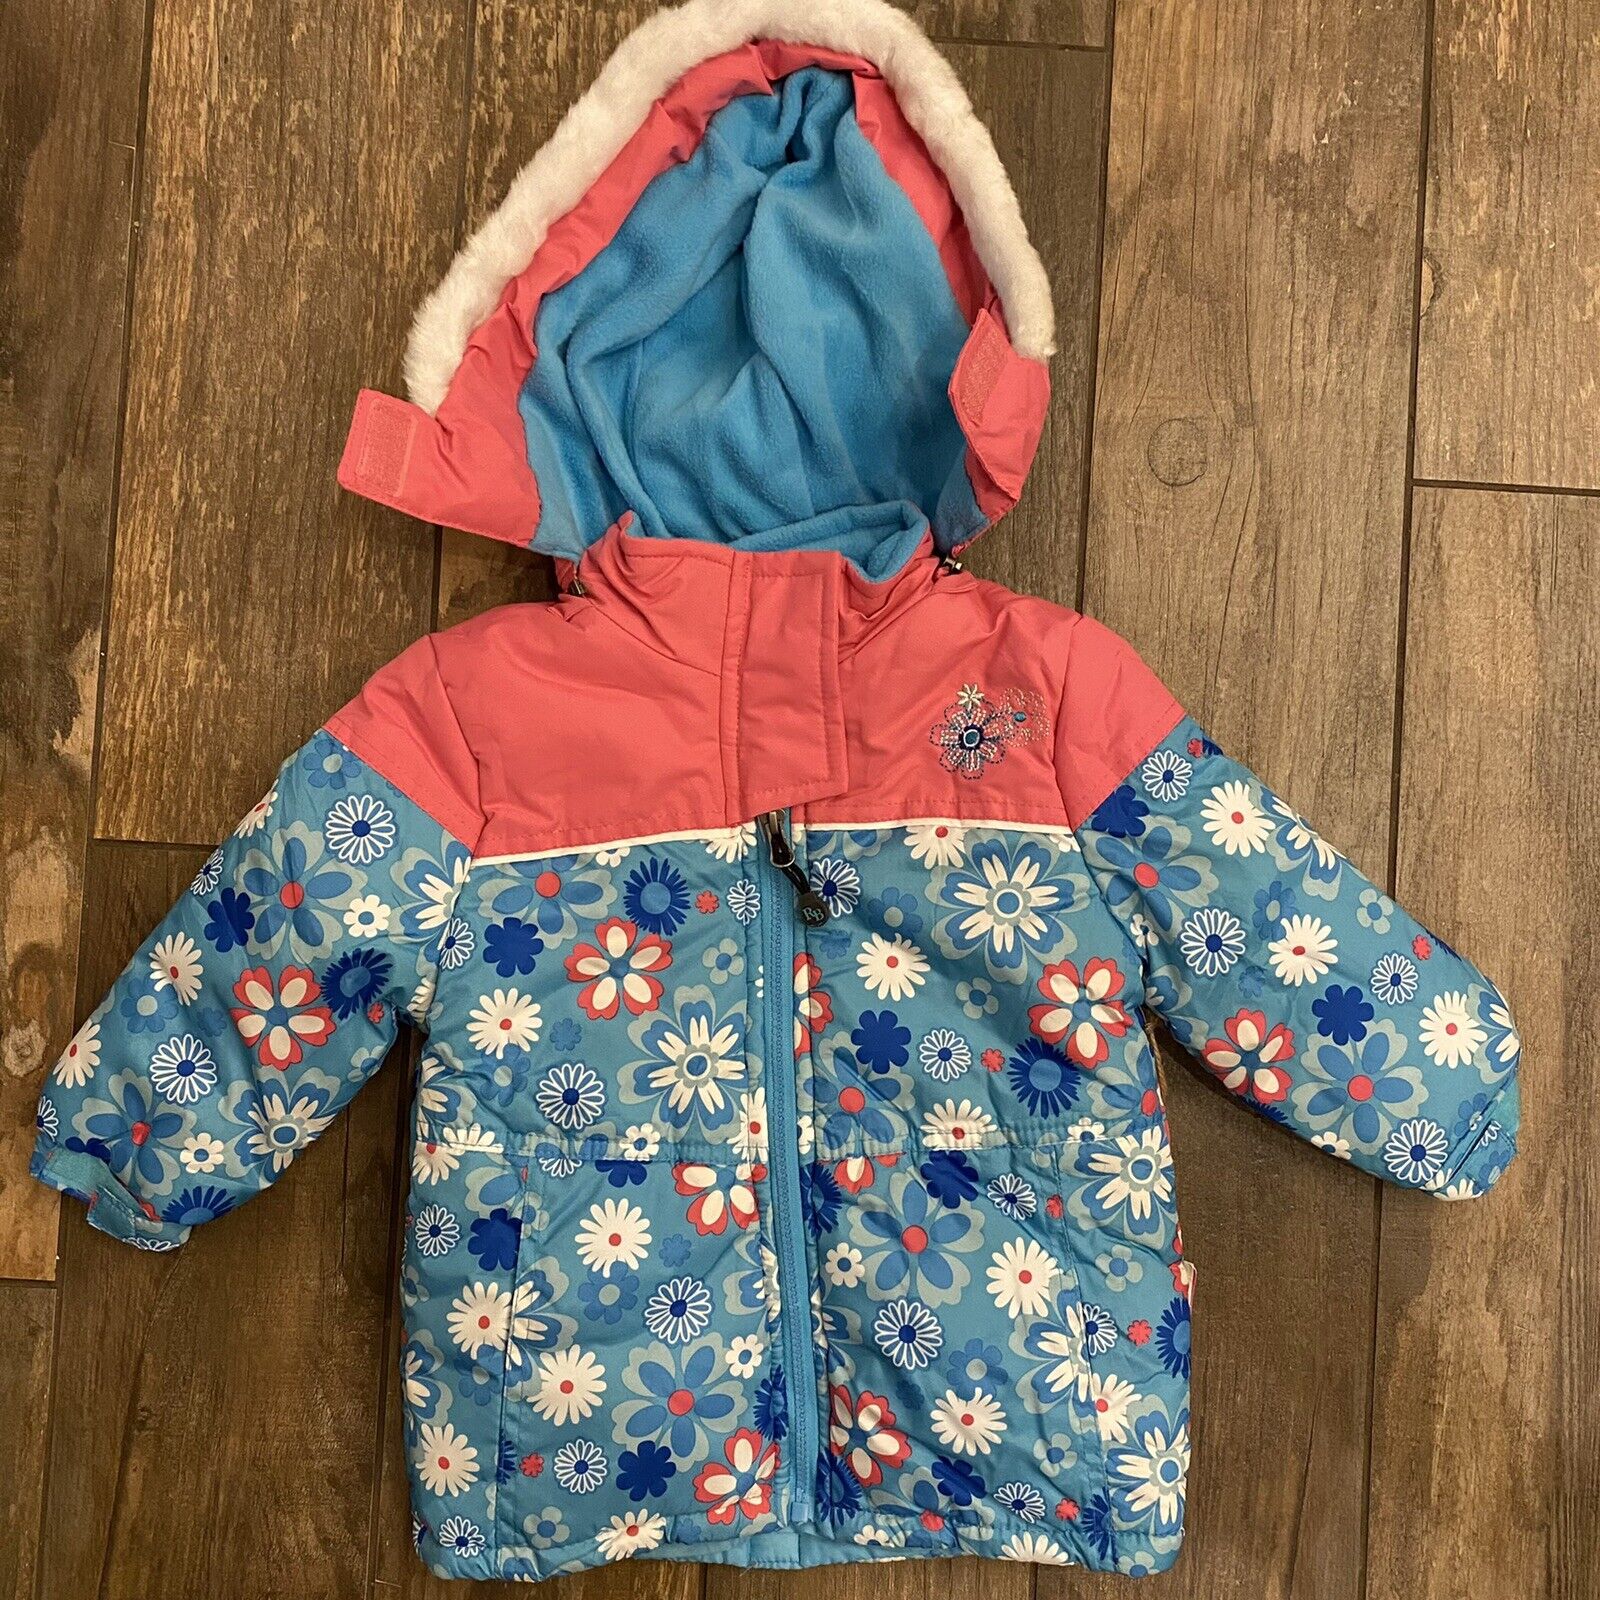 Rugged Bear Girls Winter Coat Lines Jacket Size 2T Hooded NWT Floral Turquoise Rugged Bear